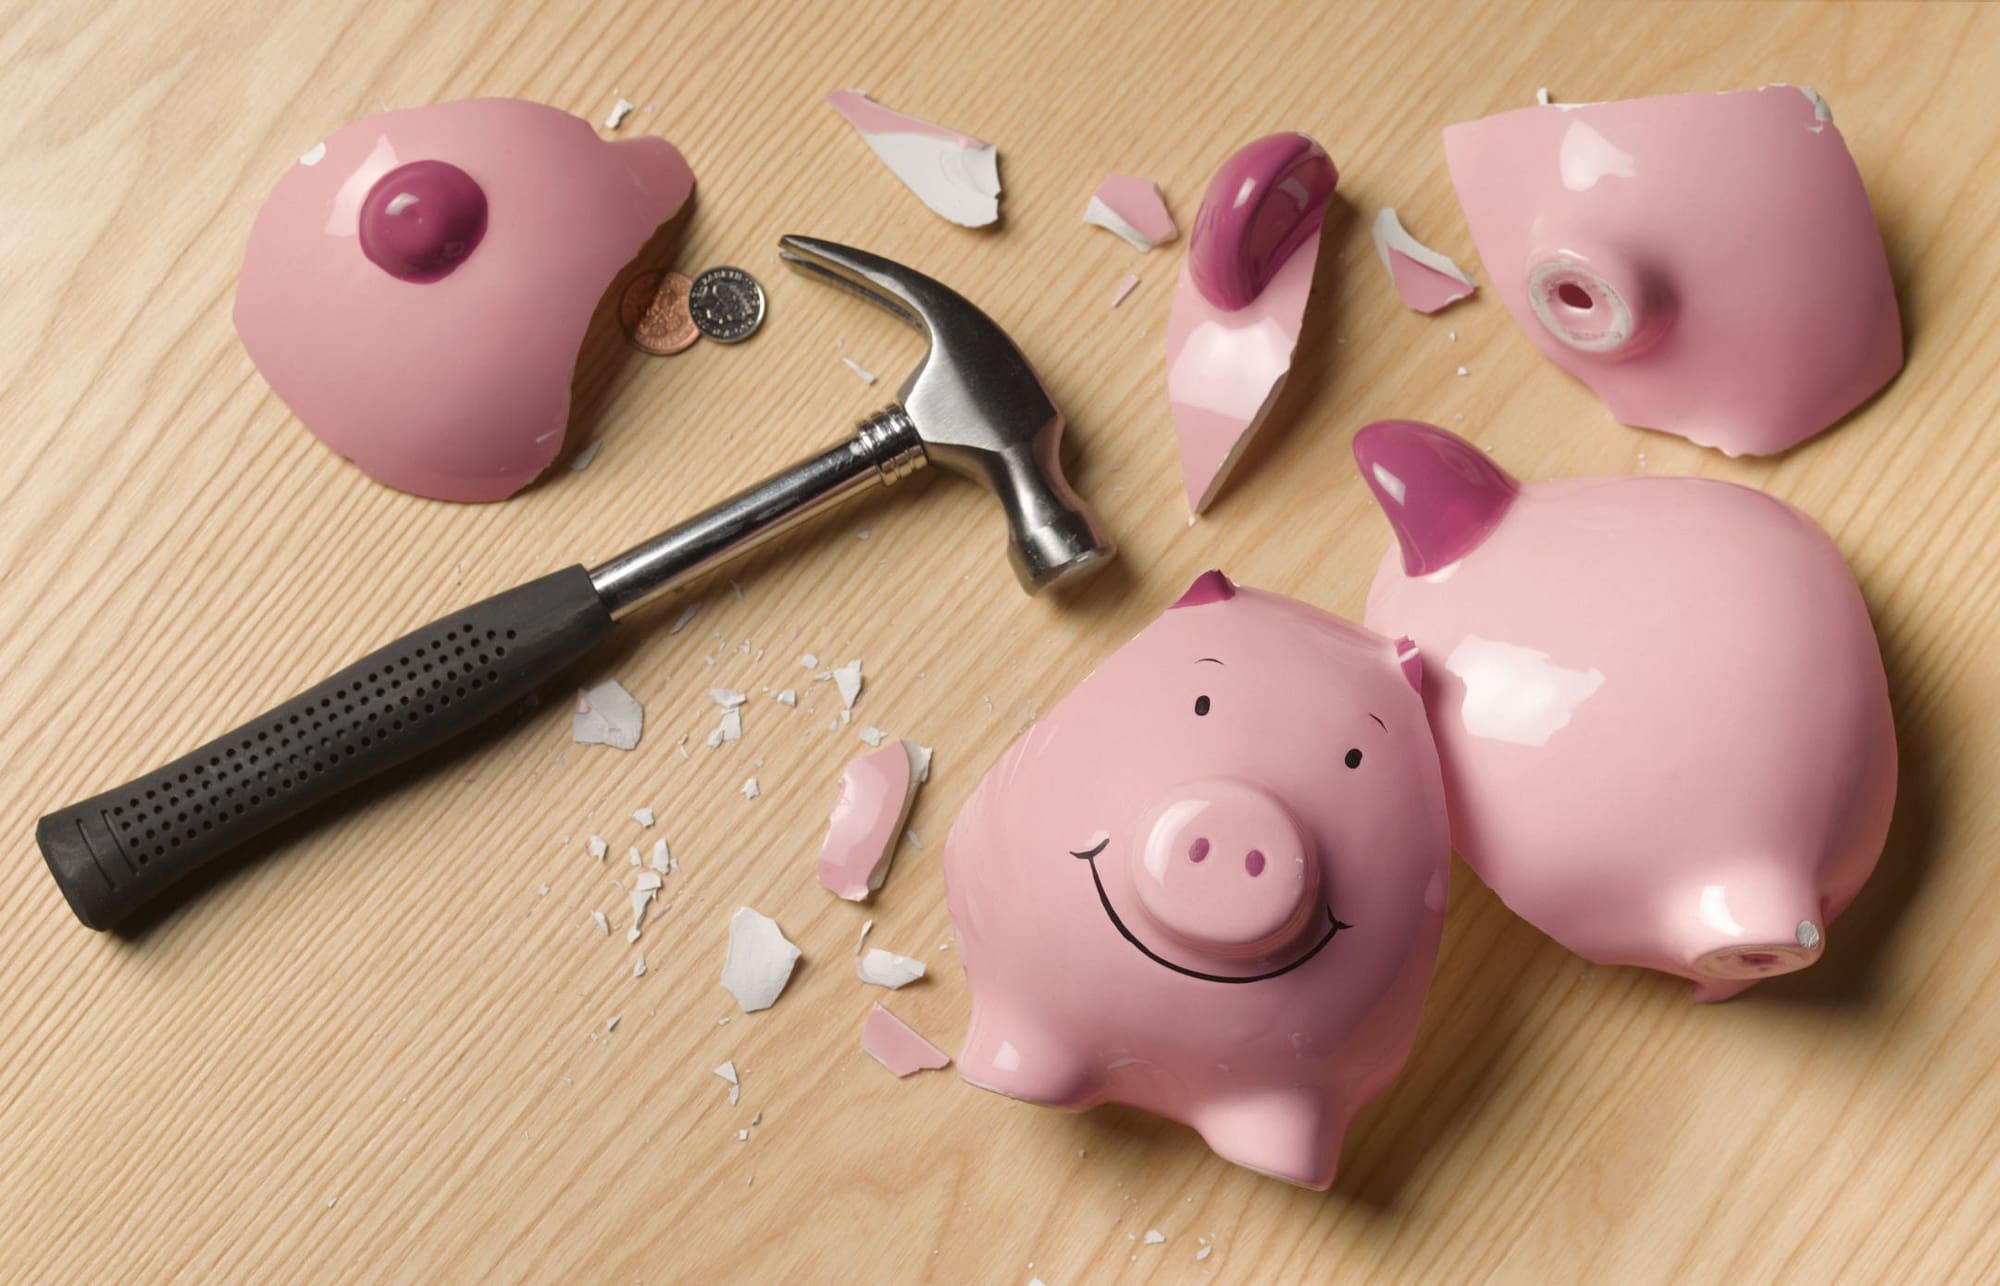 5 WAYS TO SAVE MONEY IF YOU ARE BROKE